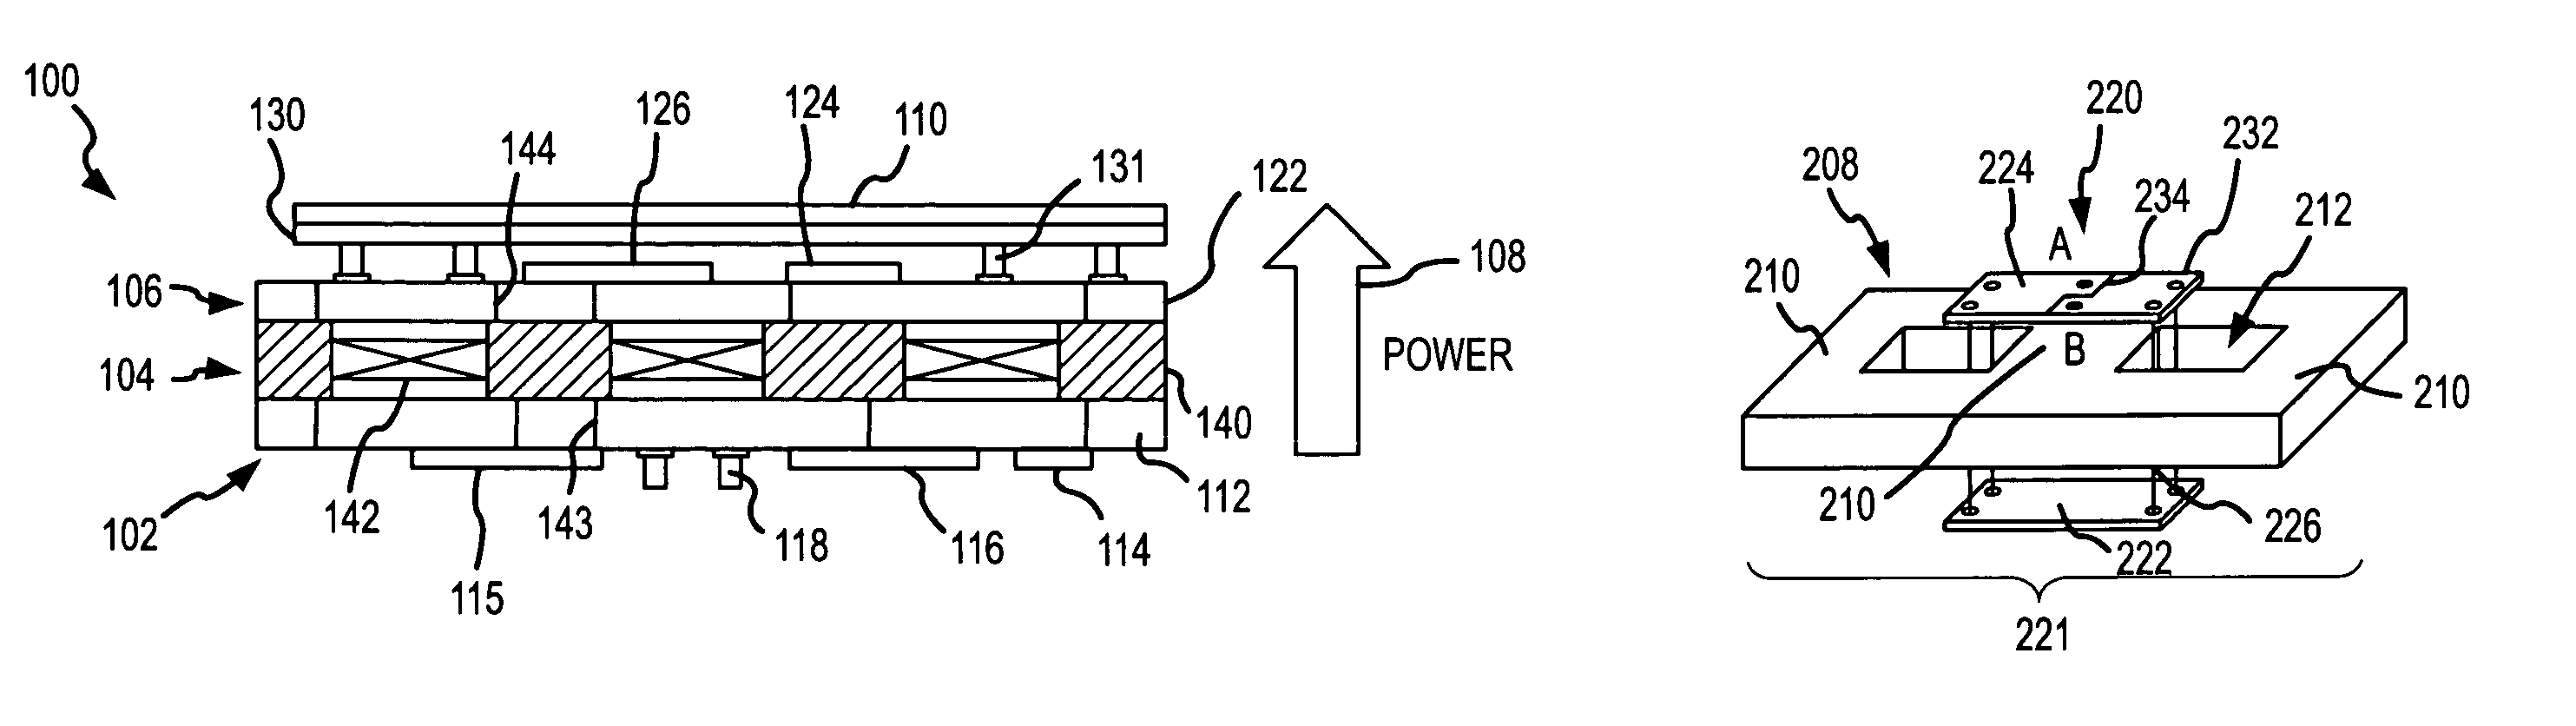 Vertically packaged switched-mode power converter